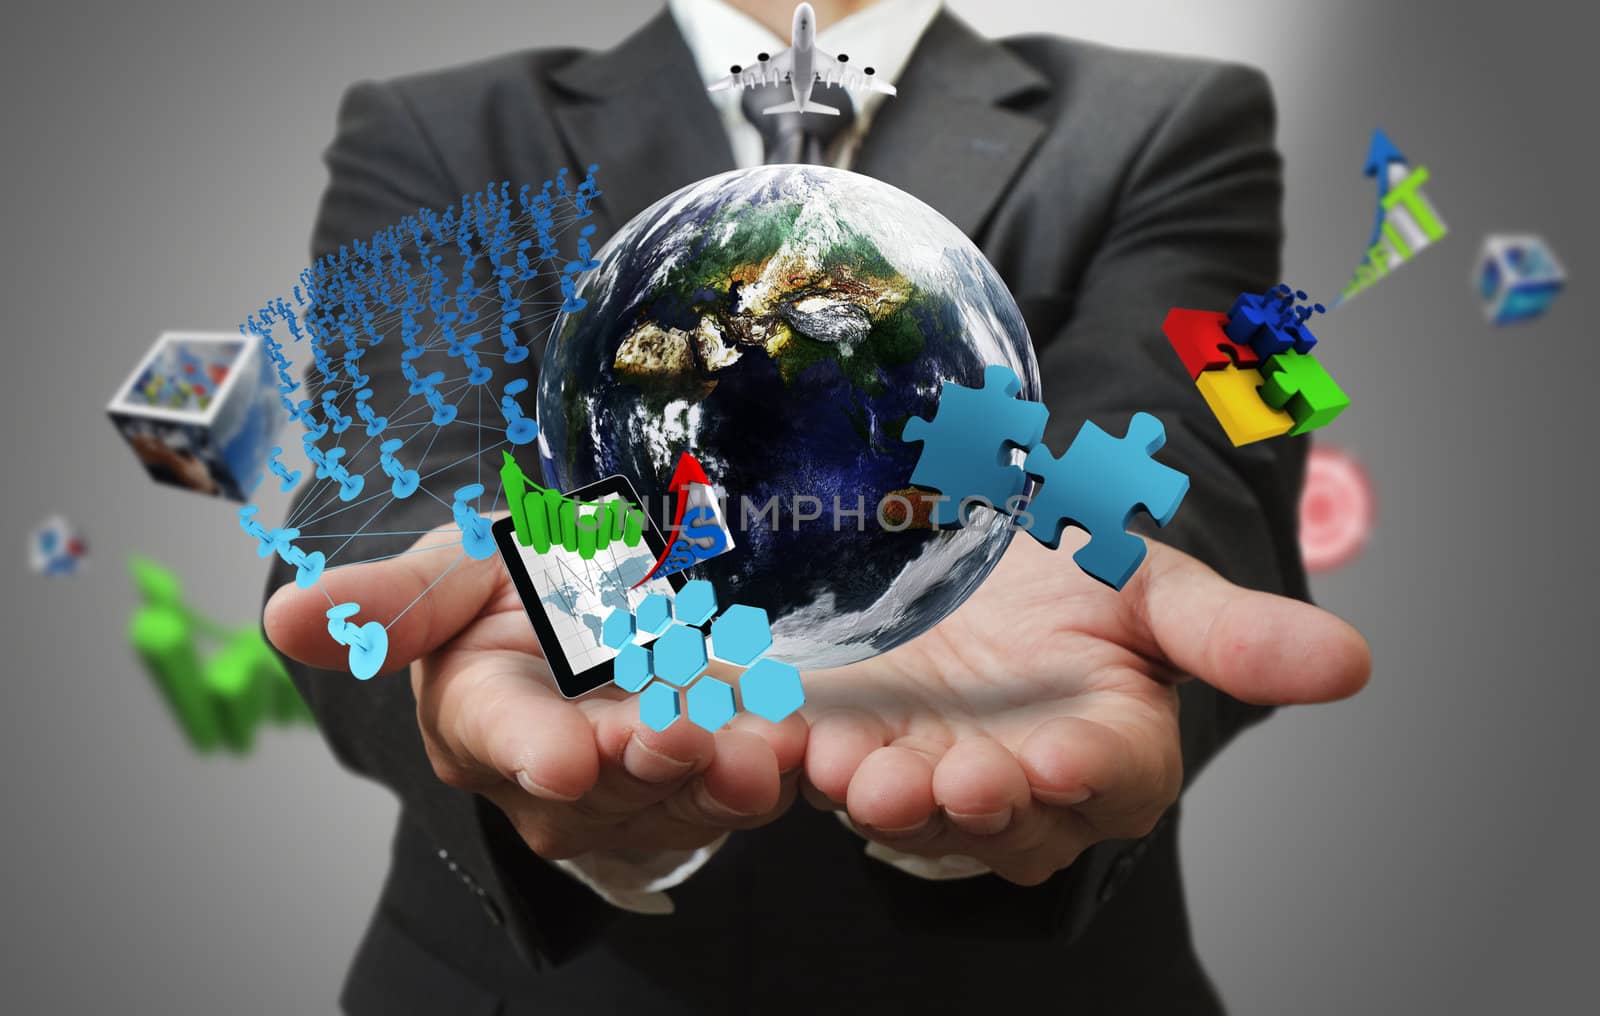 business man hand shows the world of business as concept"Elements of this image furnished by NASA"